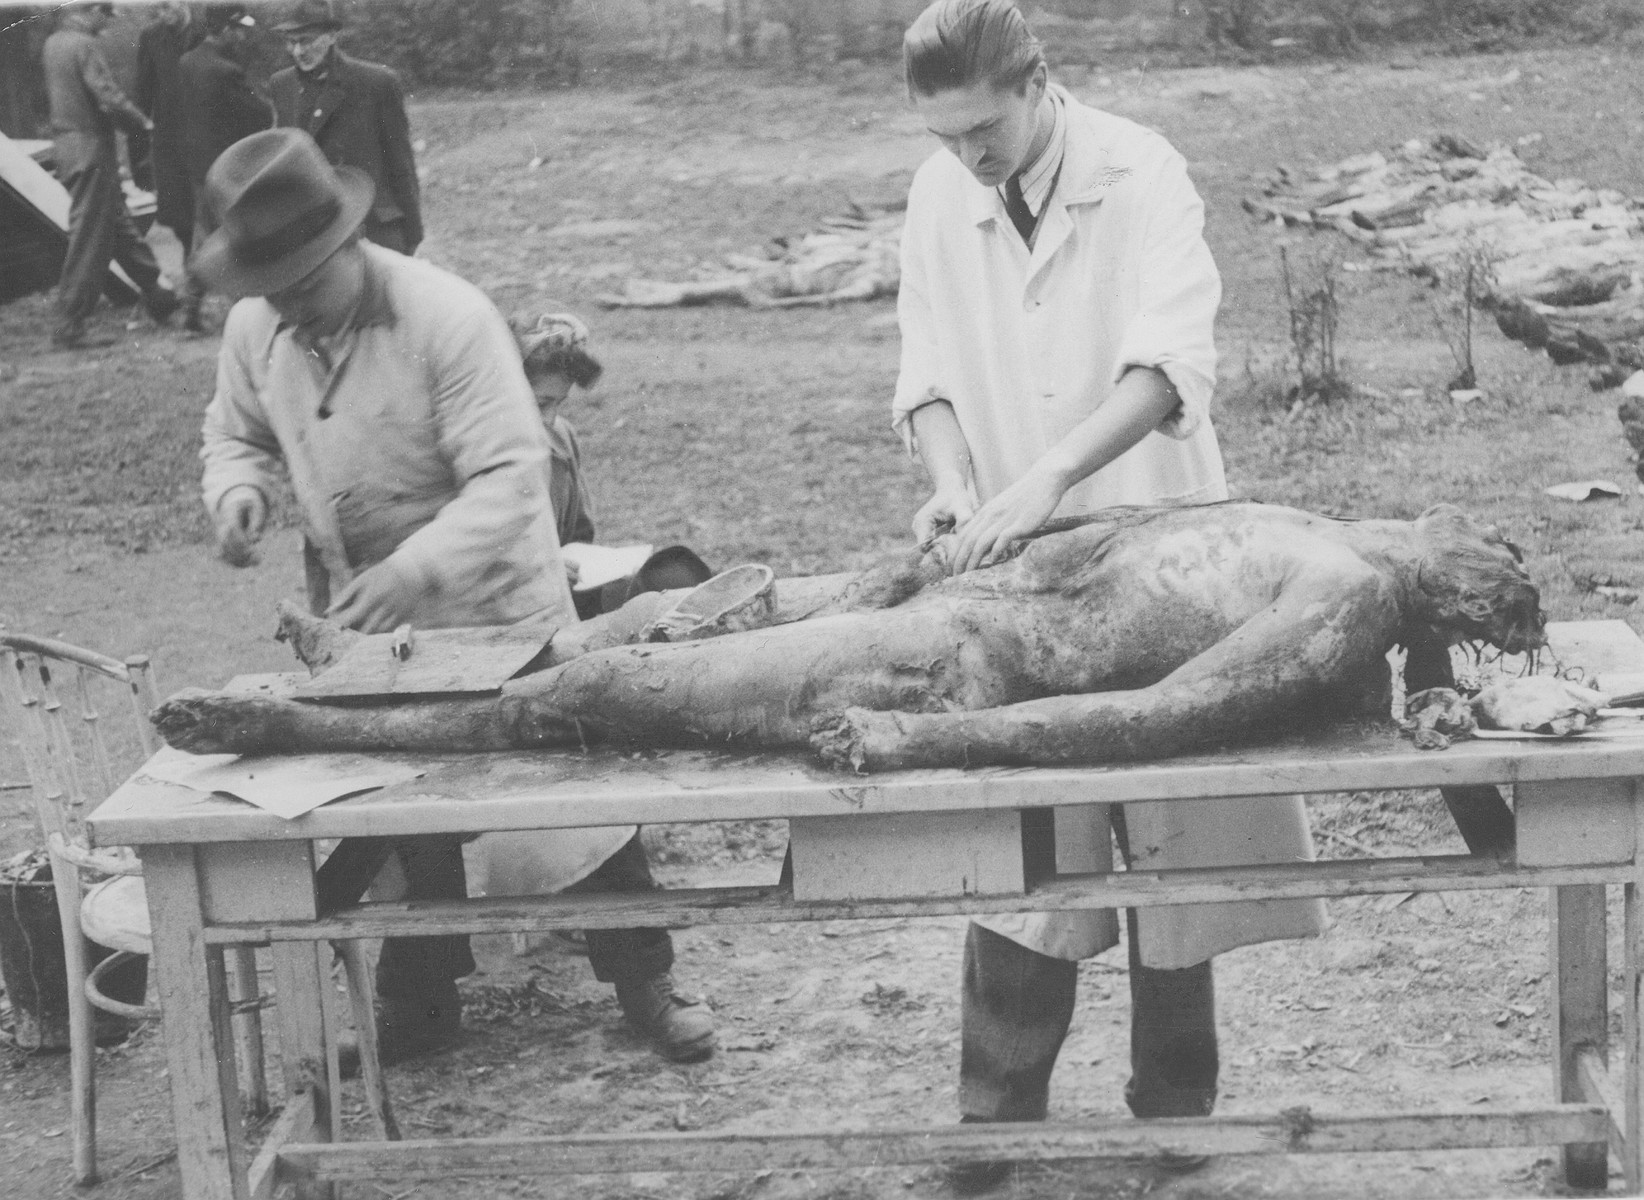 Members of the Commission for the Investigation of Nazi and Arrow Cross Atrocities perform an autopsy on one of the corpses exhumed from a mass grave.  The victim is one of the many Jews killed in the Maros Street Hospital massacre.